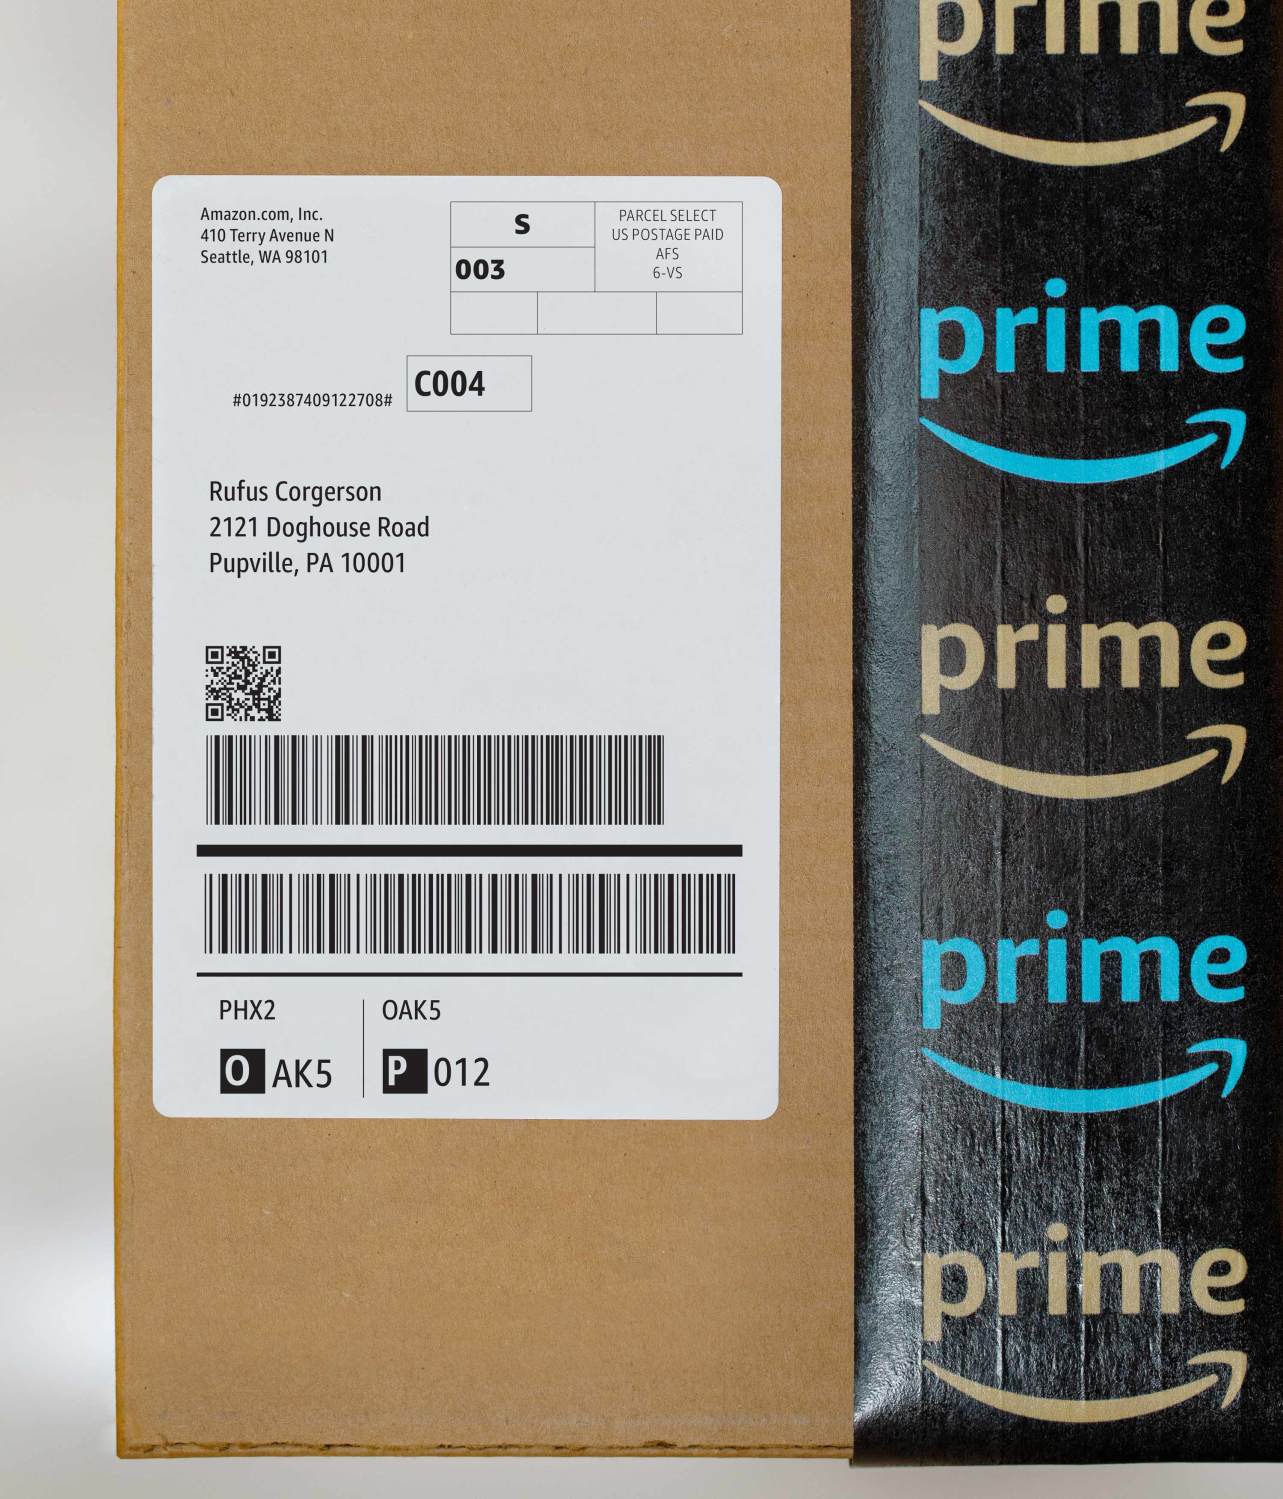 amazon package tracking number tba361192011000